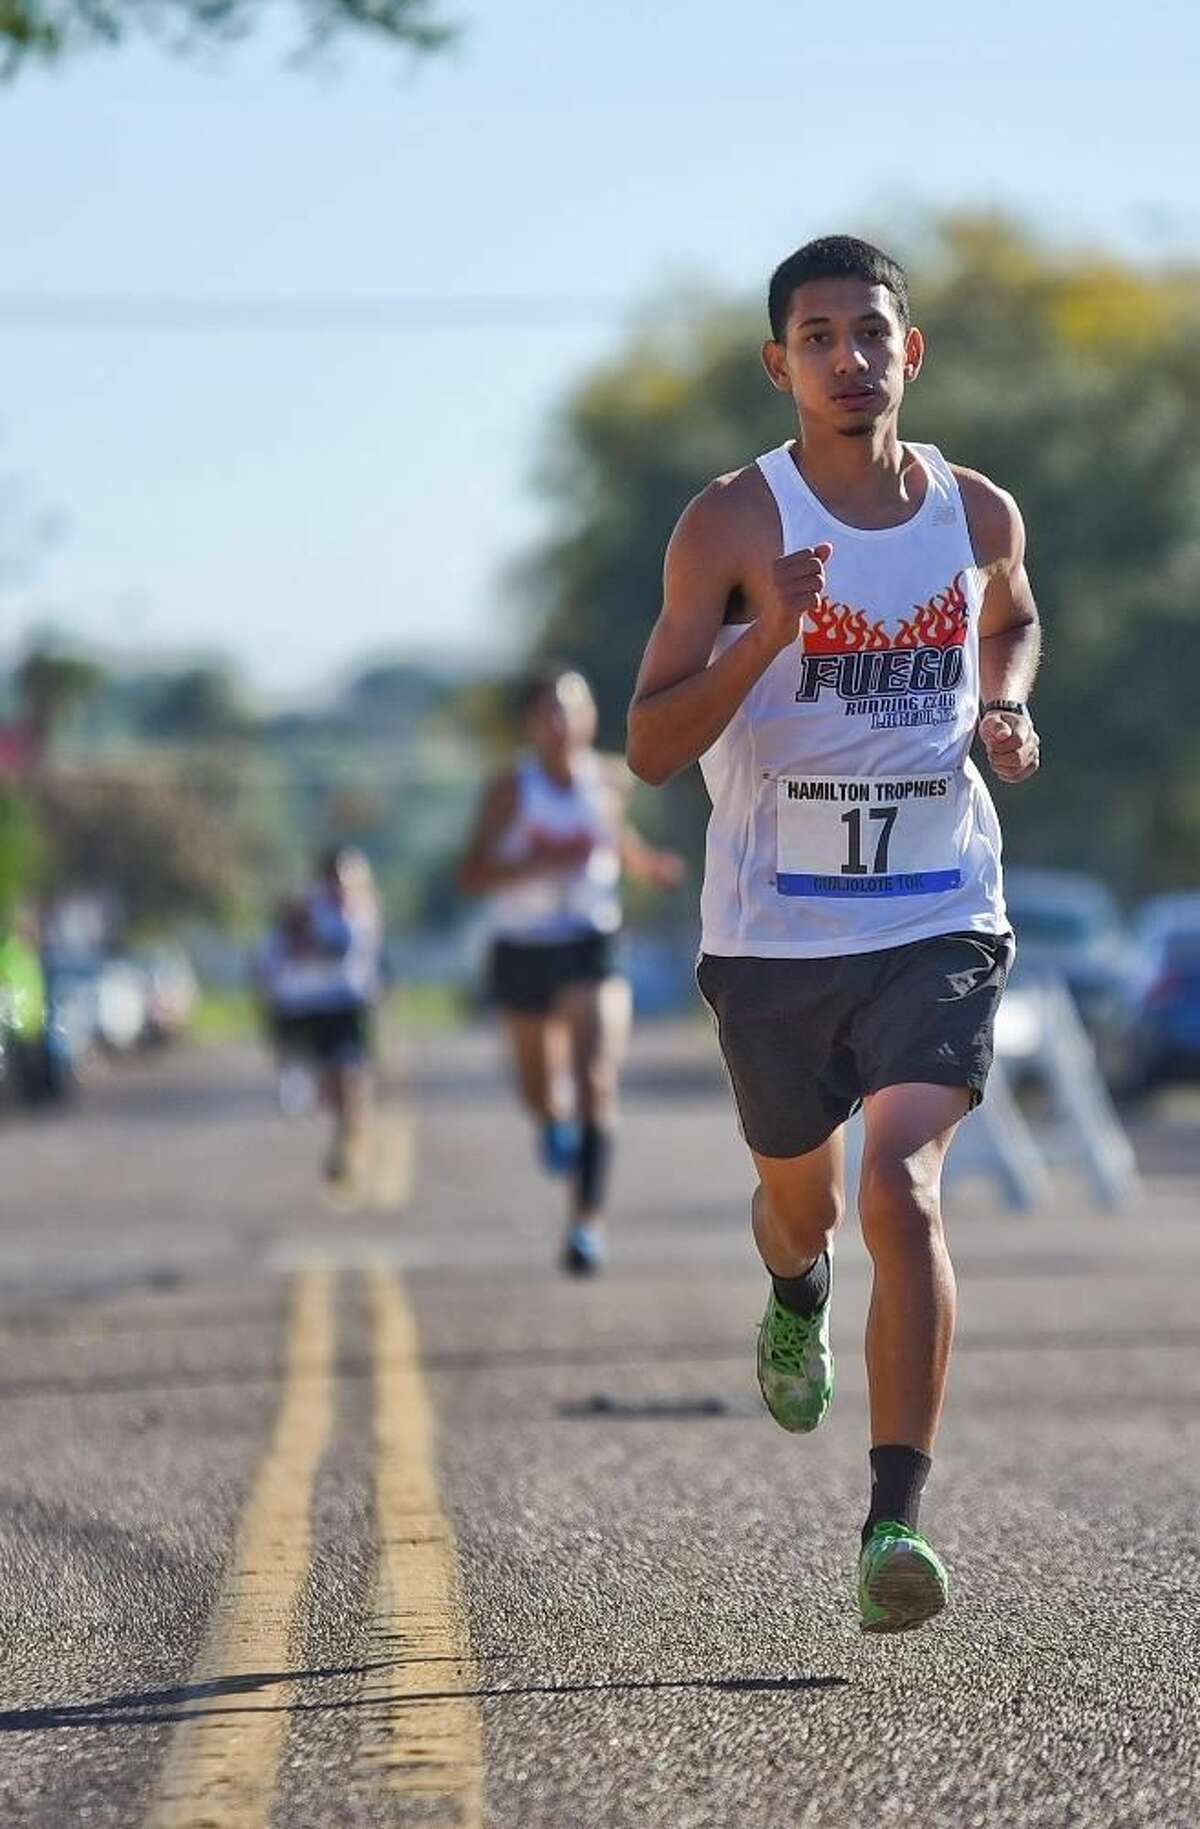 Angel Perez leads other runners down Garden Street on Thursday morning during the 35th Annual Guajolote 10k Race, sponosored by Hamilton Trophies. Perez won third place in this race. Photo by Danny Zaragoza